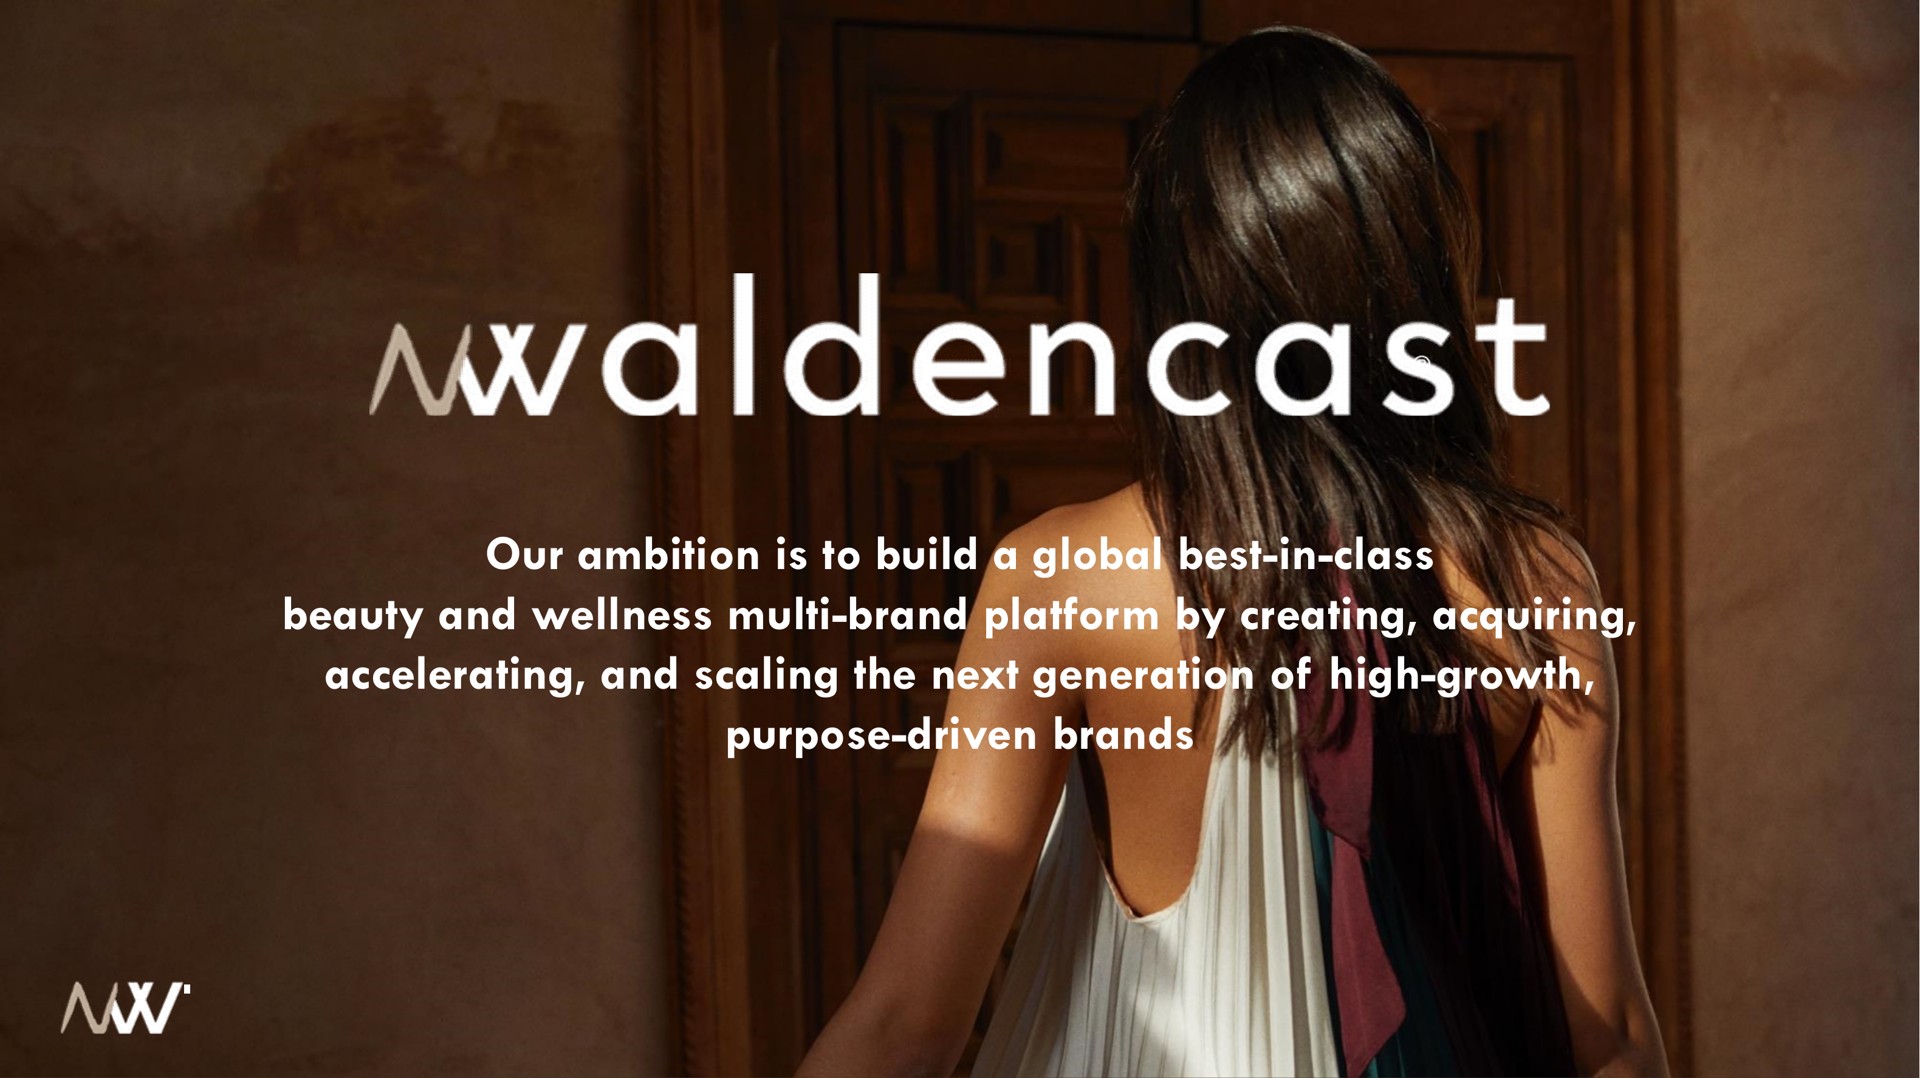 our ambition is to build a global best in class beauty and wellness brand platform by creating acquiring accelerating and scaling the next generation of high growth purpose driven brands | Waldencast